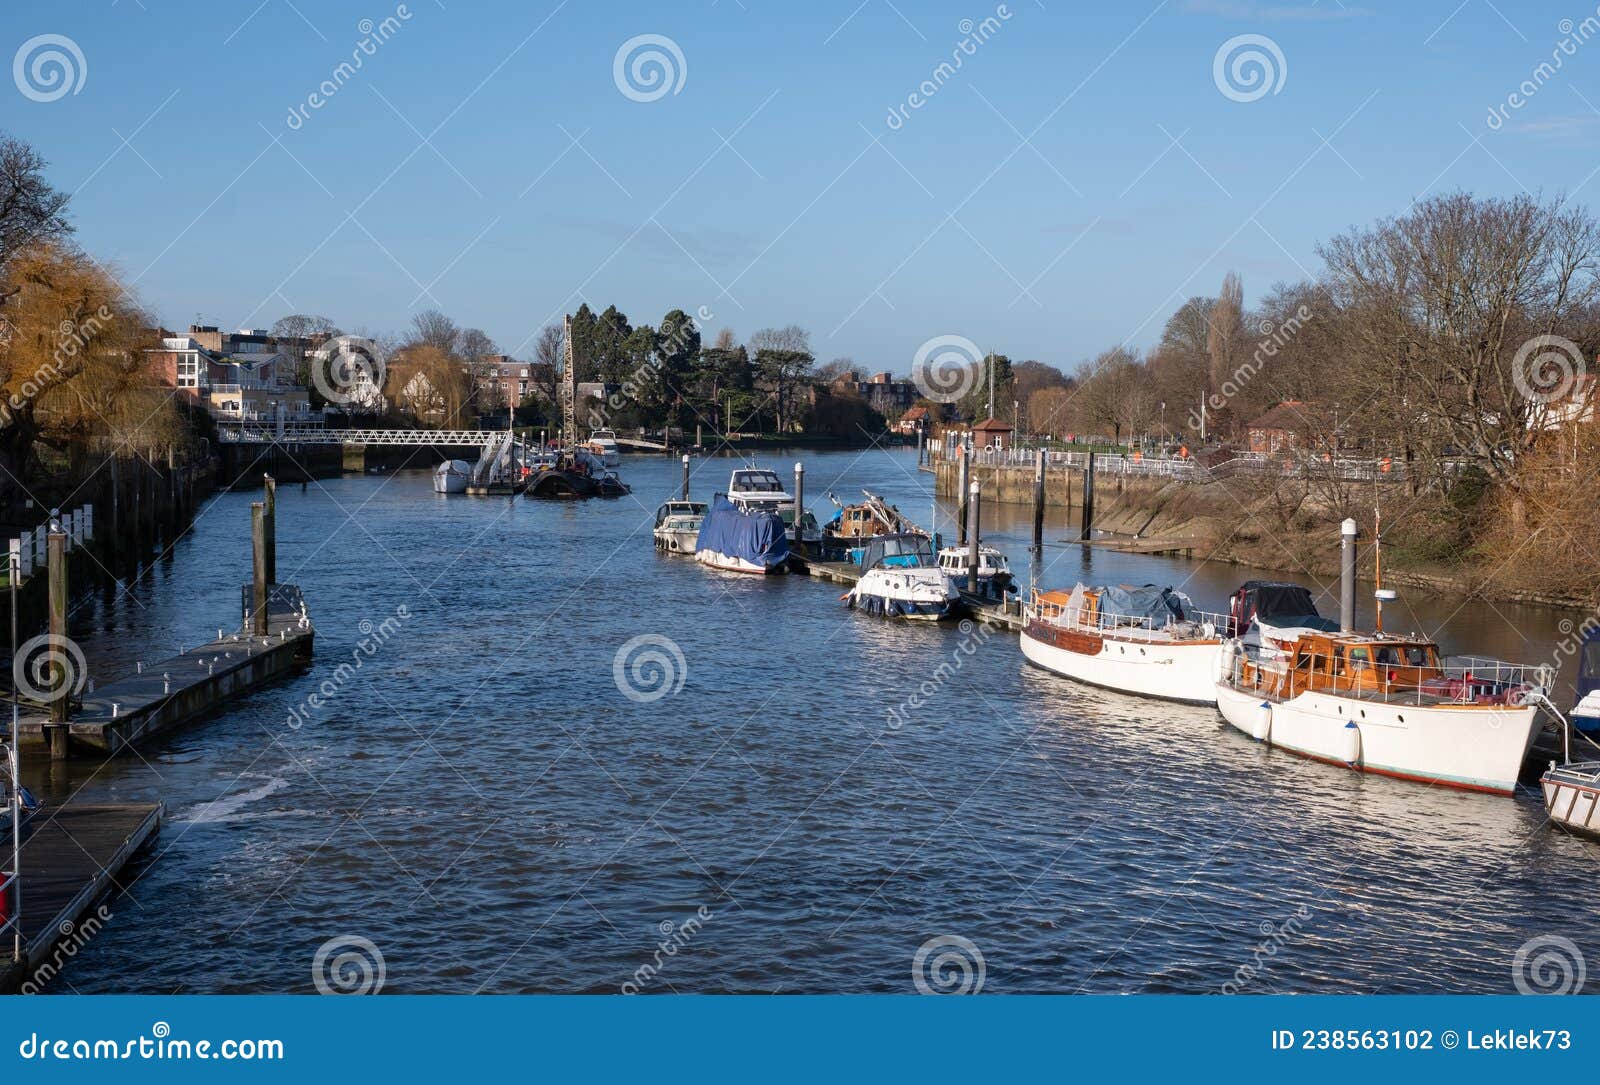 view of the river thames at teddington, west london, uk, with blue sky and boats moored.